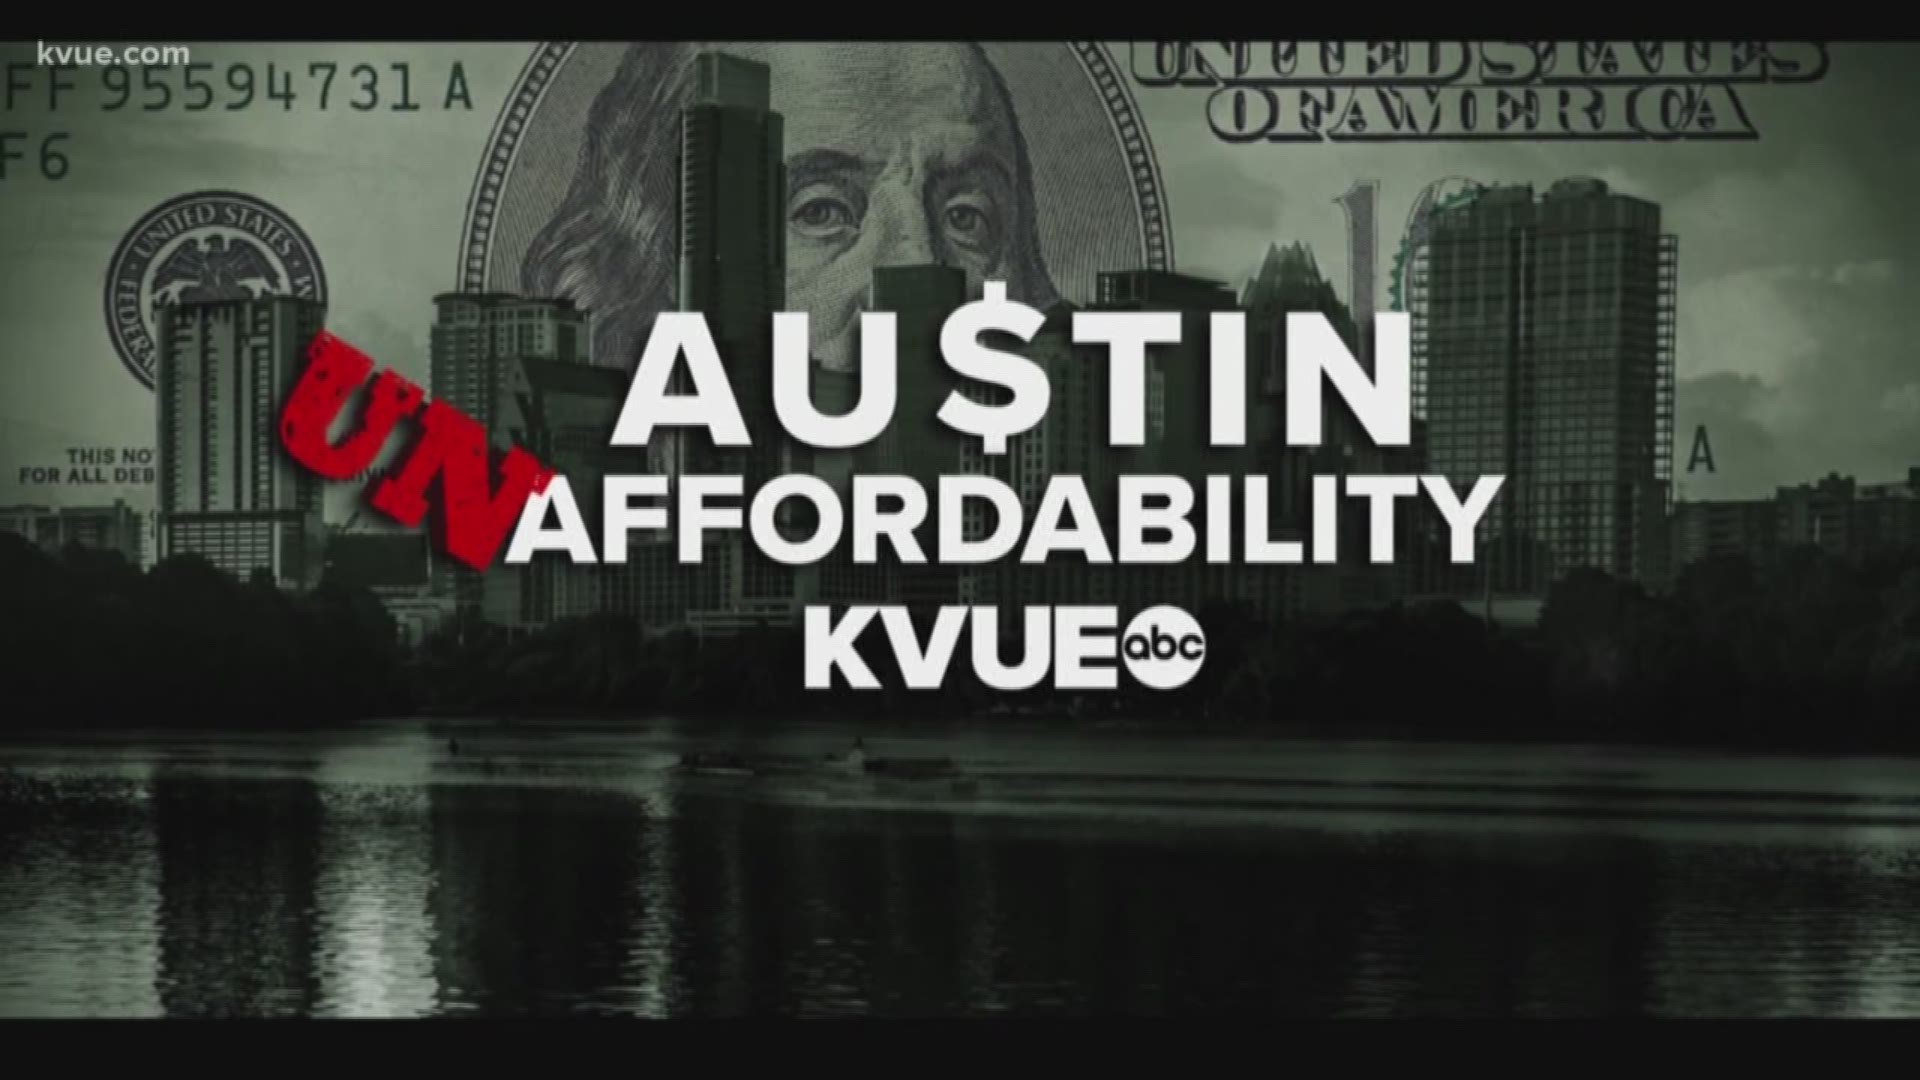 Austin has been named as the number one place to live in the country, but as our city grows, property values and taxes go up.